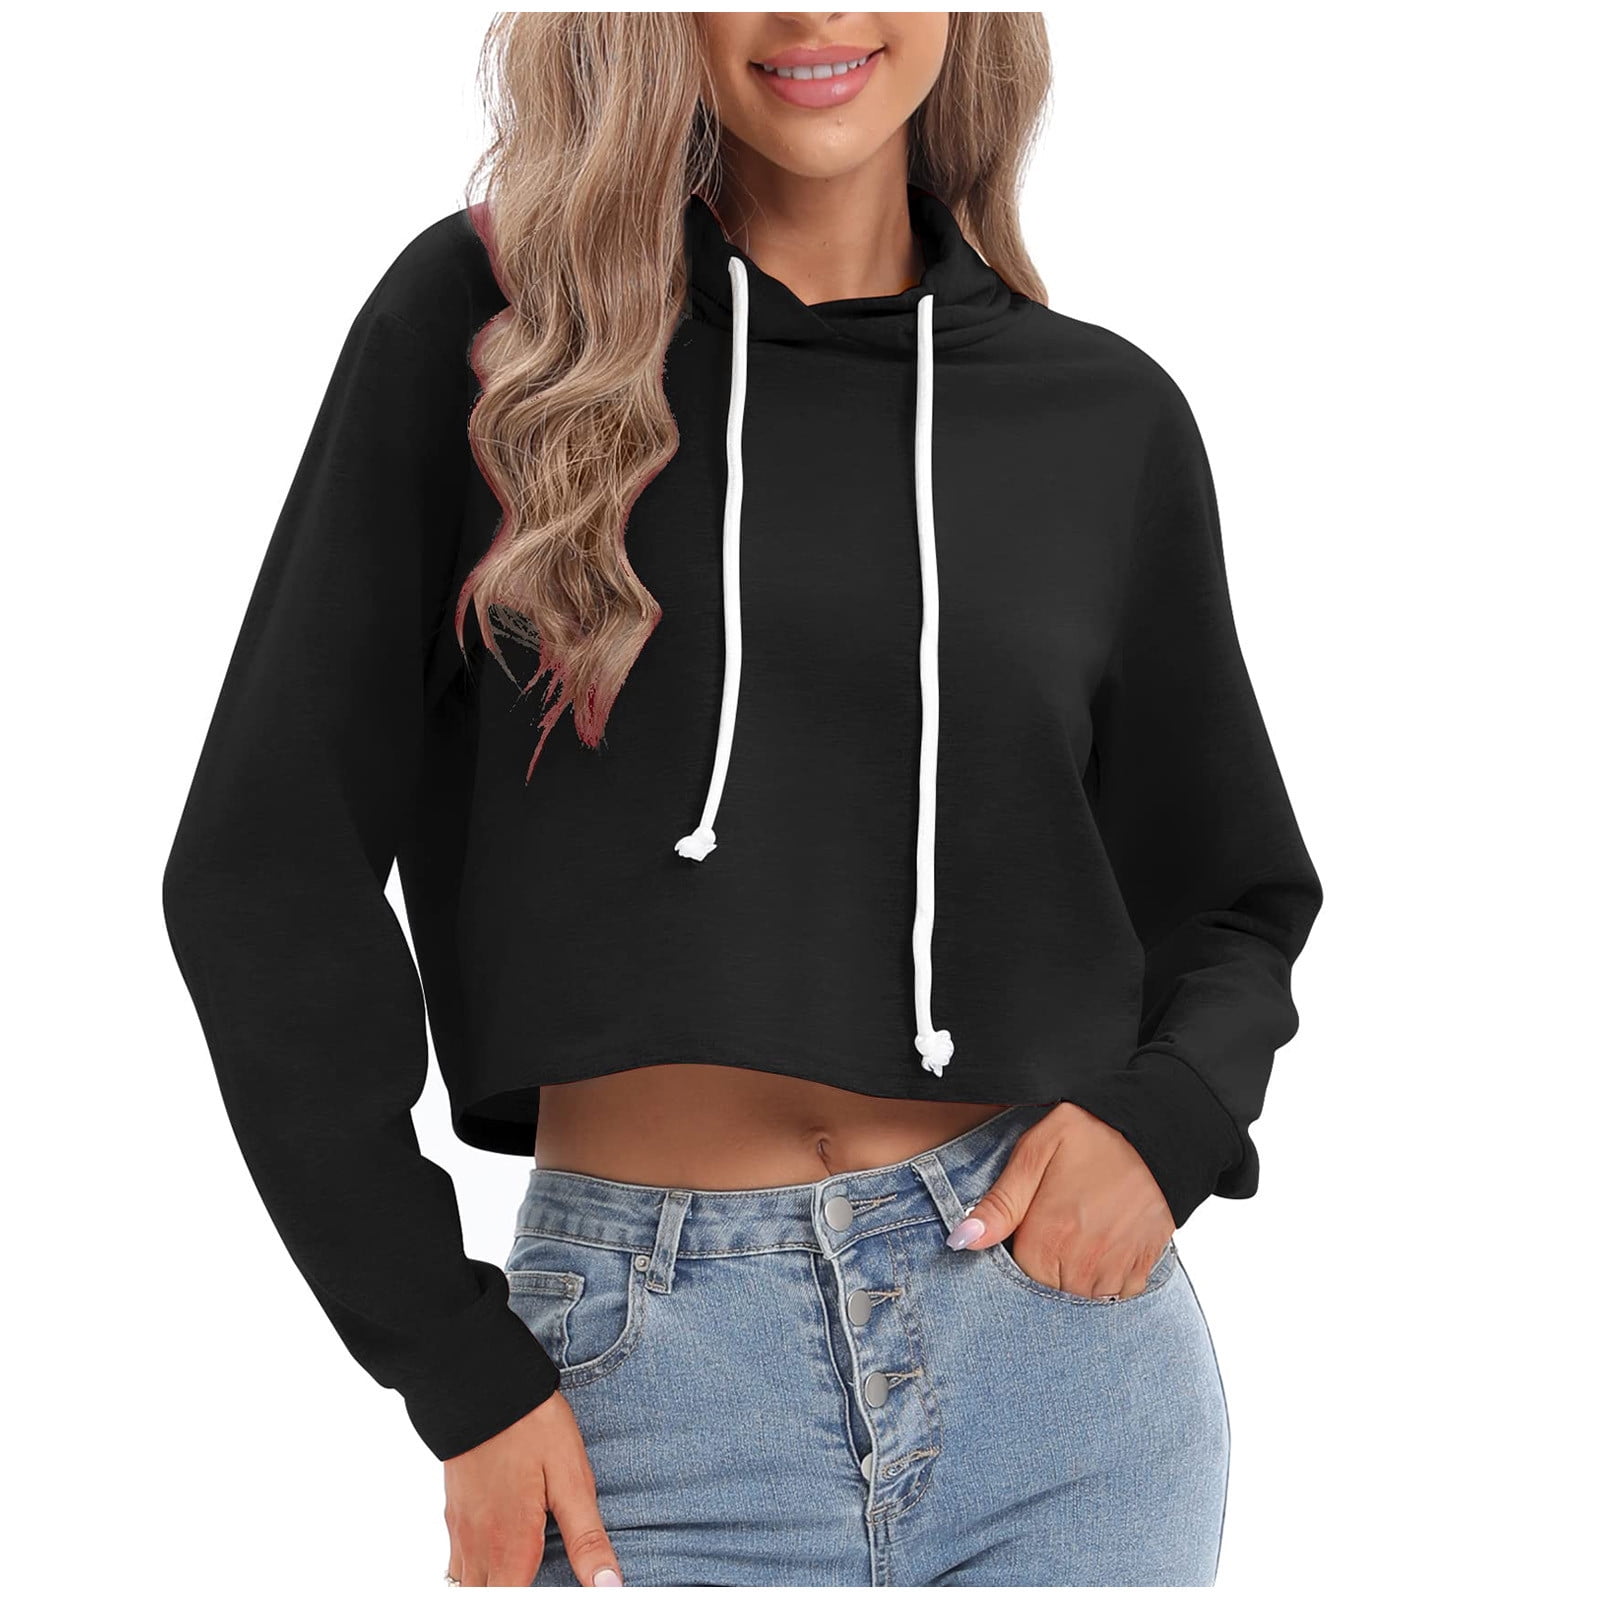 ZQGJB Long Sleeve Cropped Sweatshirts for Women Fall Spring Casual Long  Sleeve Pullovers Cute Plain Crop Hoodie Tops Trendy Out Going Hoodies(Purple,XL)  